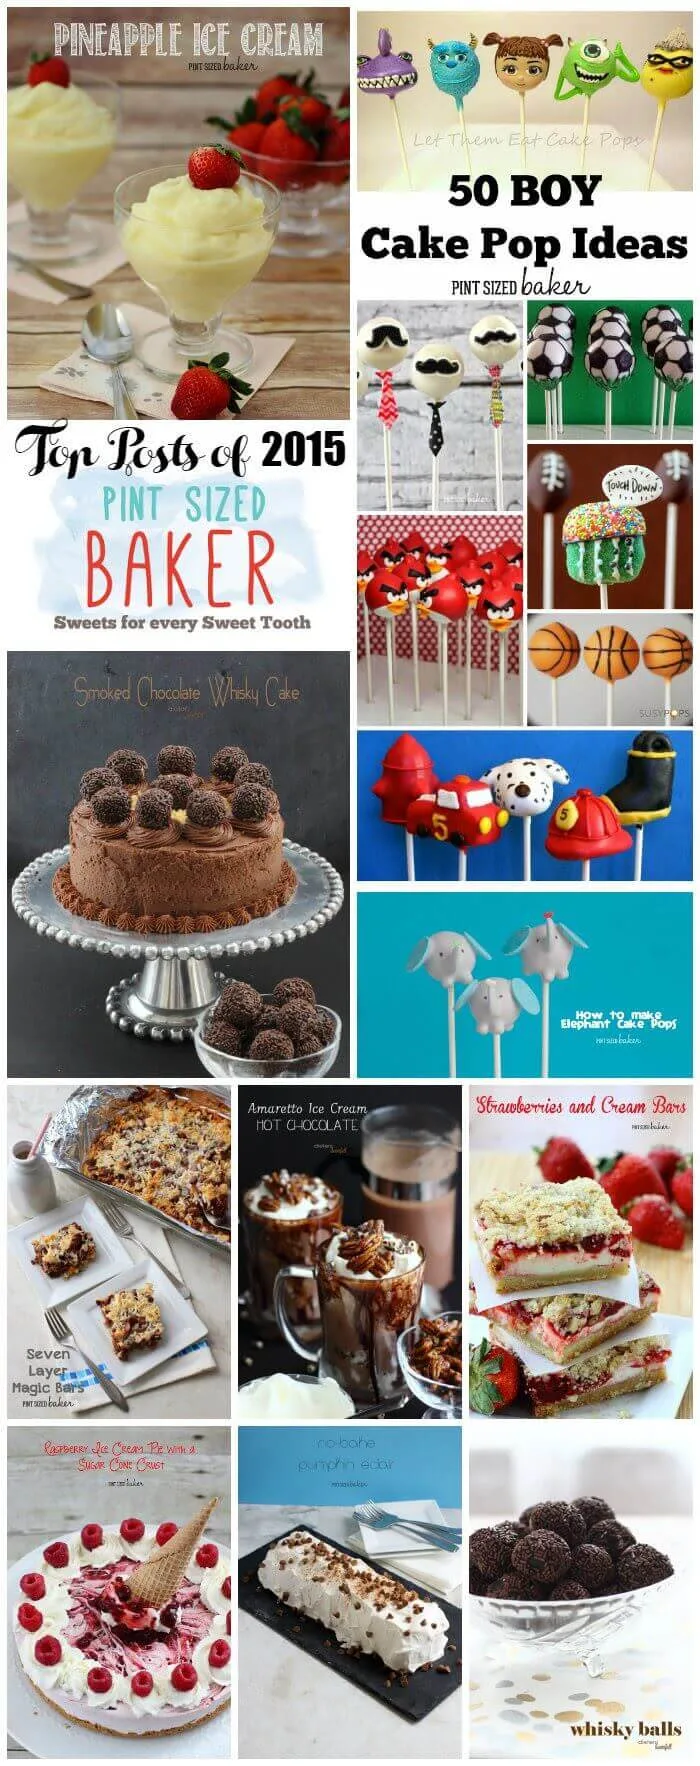 Enjoy the best of 2015 from Pint Sized Baker! A great collection of cake pops, bars, and frozen treats!